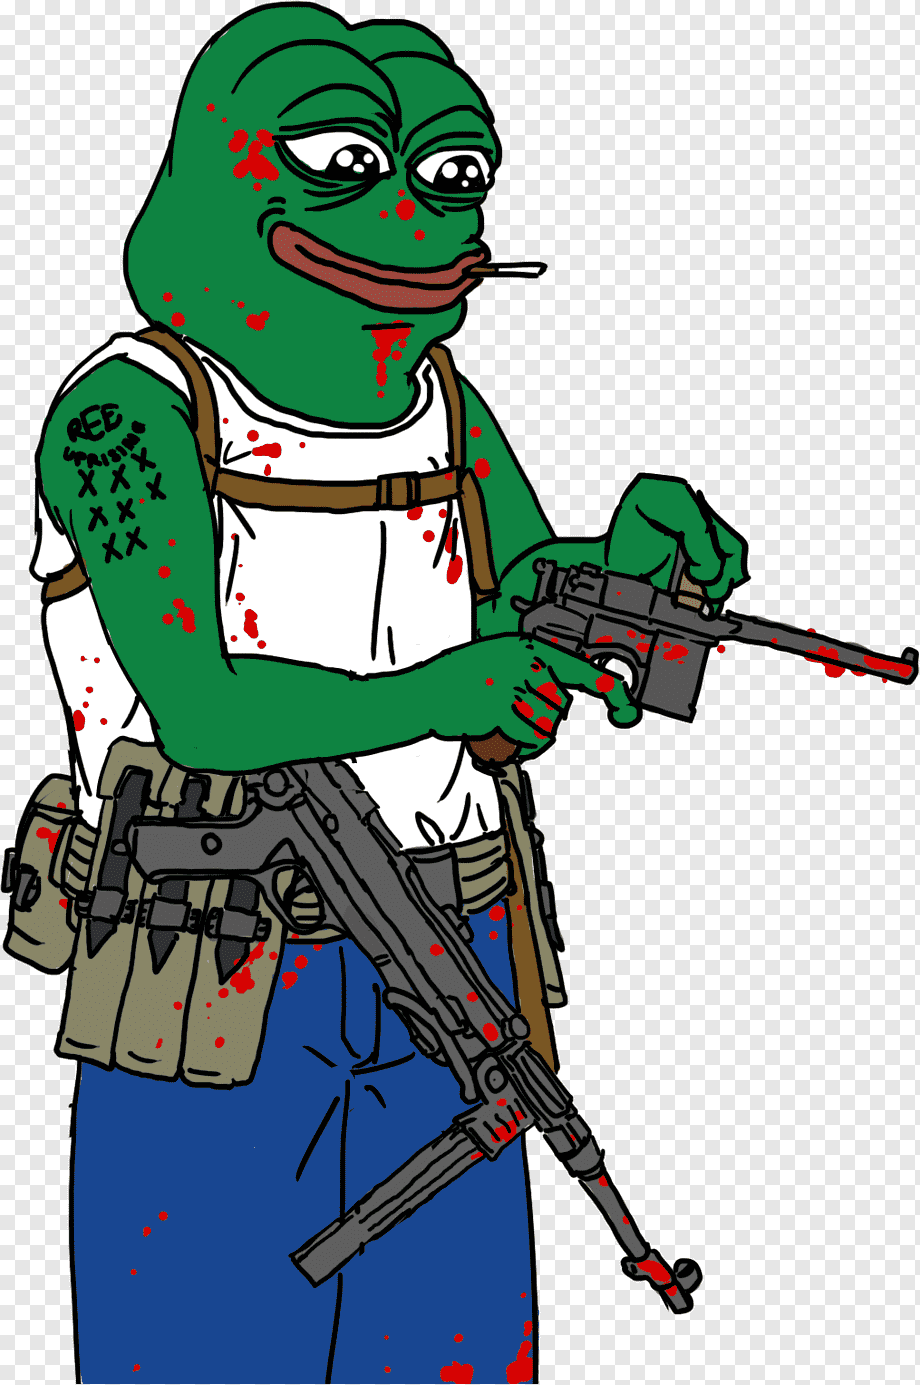 png-transparent-pepe-the-frog-pol-know-your-meme-internet-meme-frog-miscellaneous-animals-video-game.png